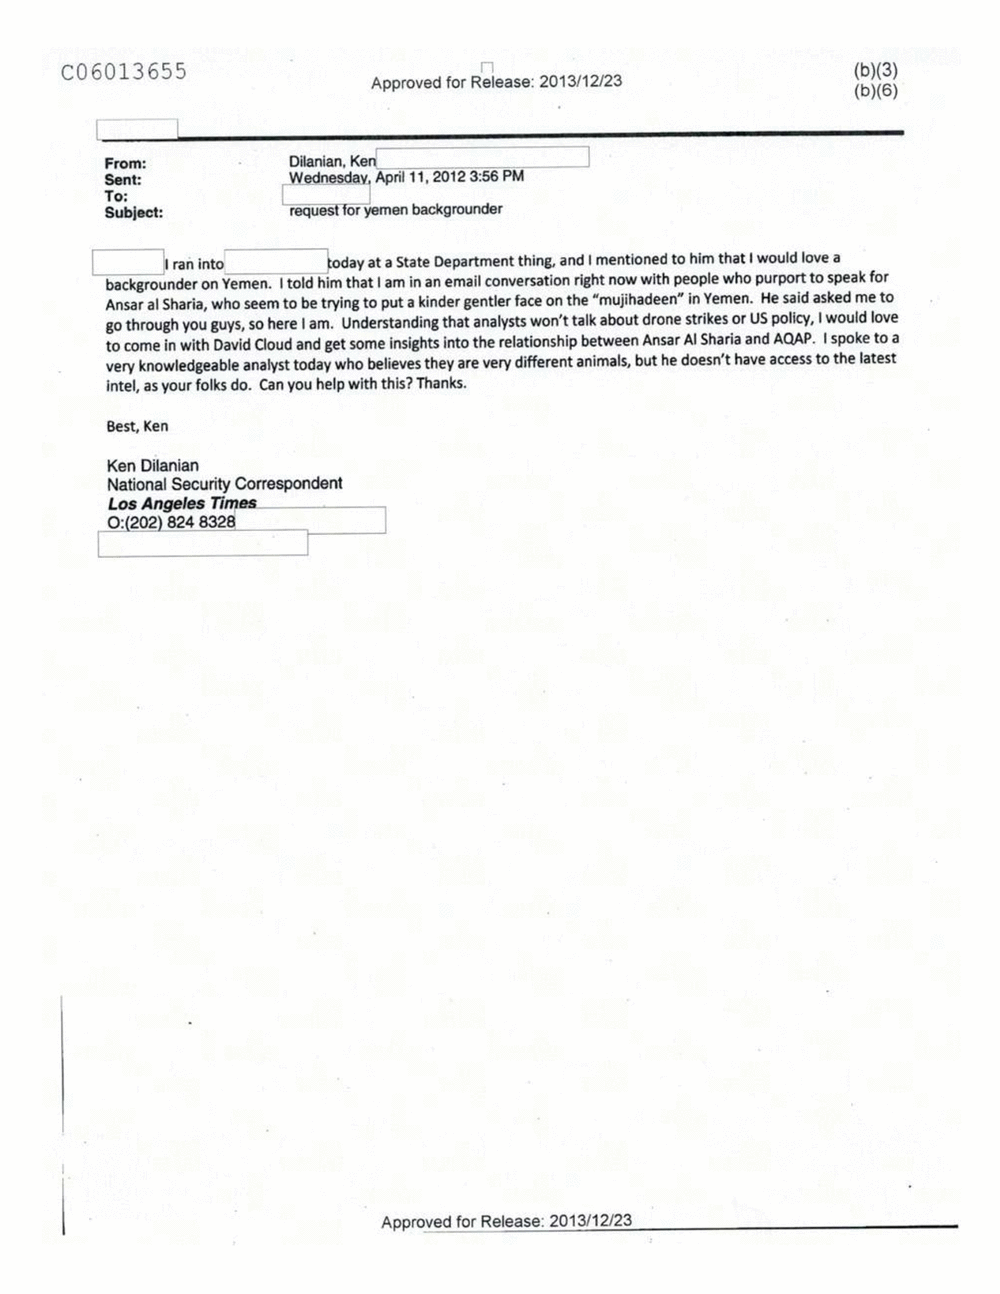 Page 505 from Email Correspondence Between Reporters and CIA Flacks